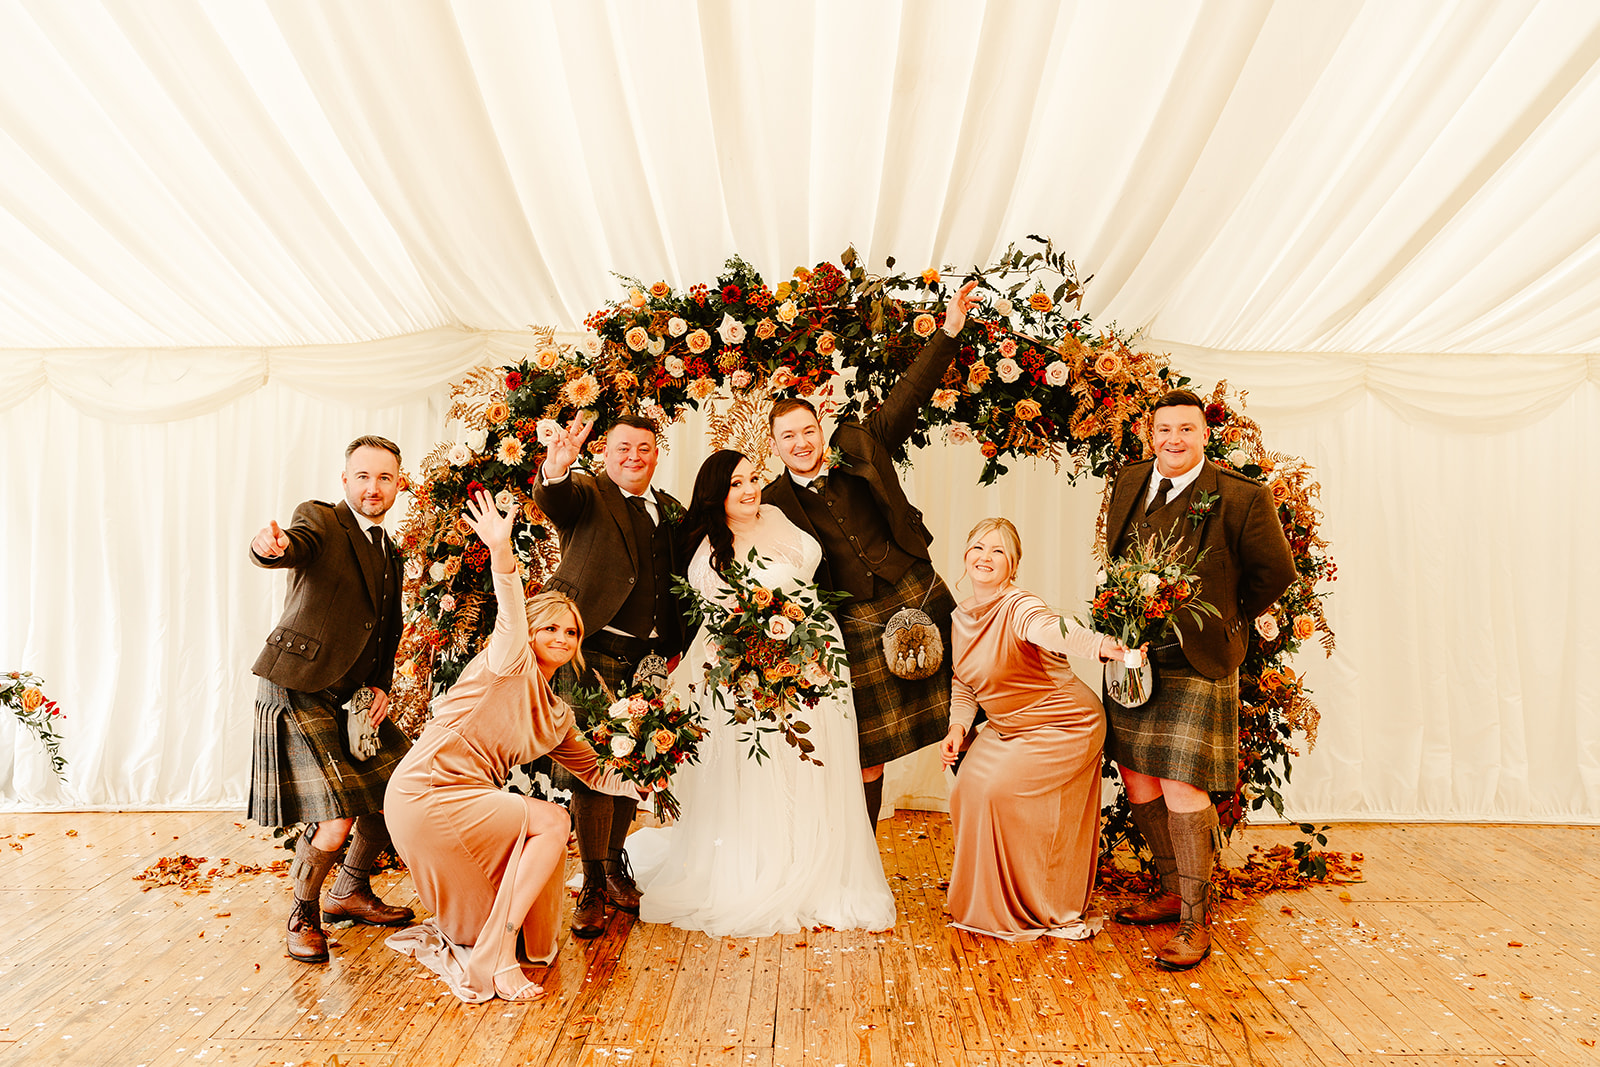 bridal party strike fun poses in front of floral arch inside a marquee at Ballogie House